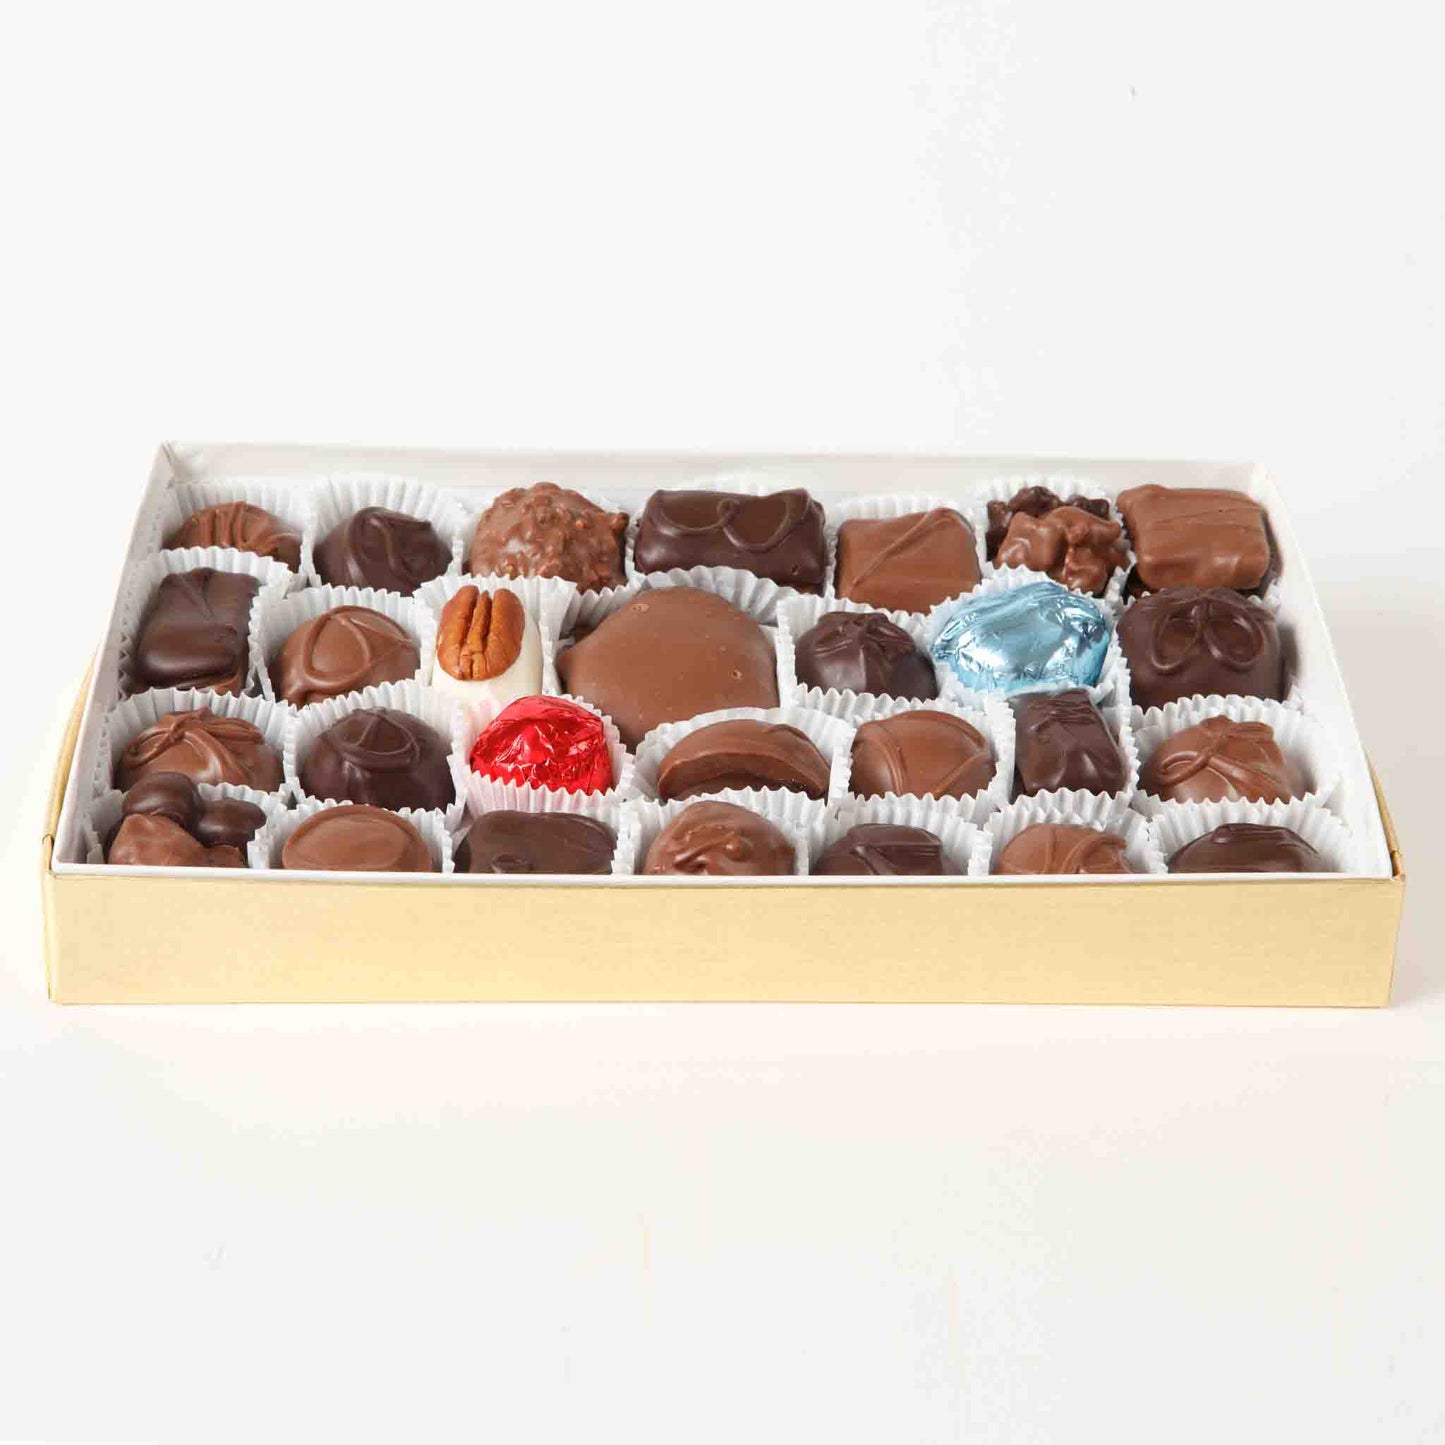 Muths Deluxe Chocolate Assortment 1lb Box